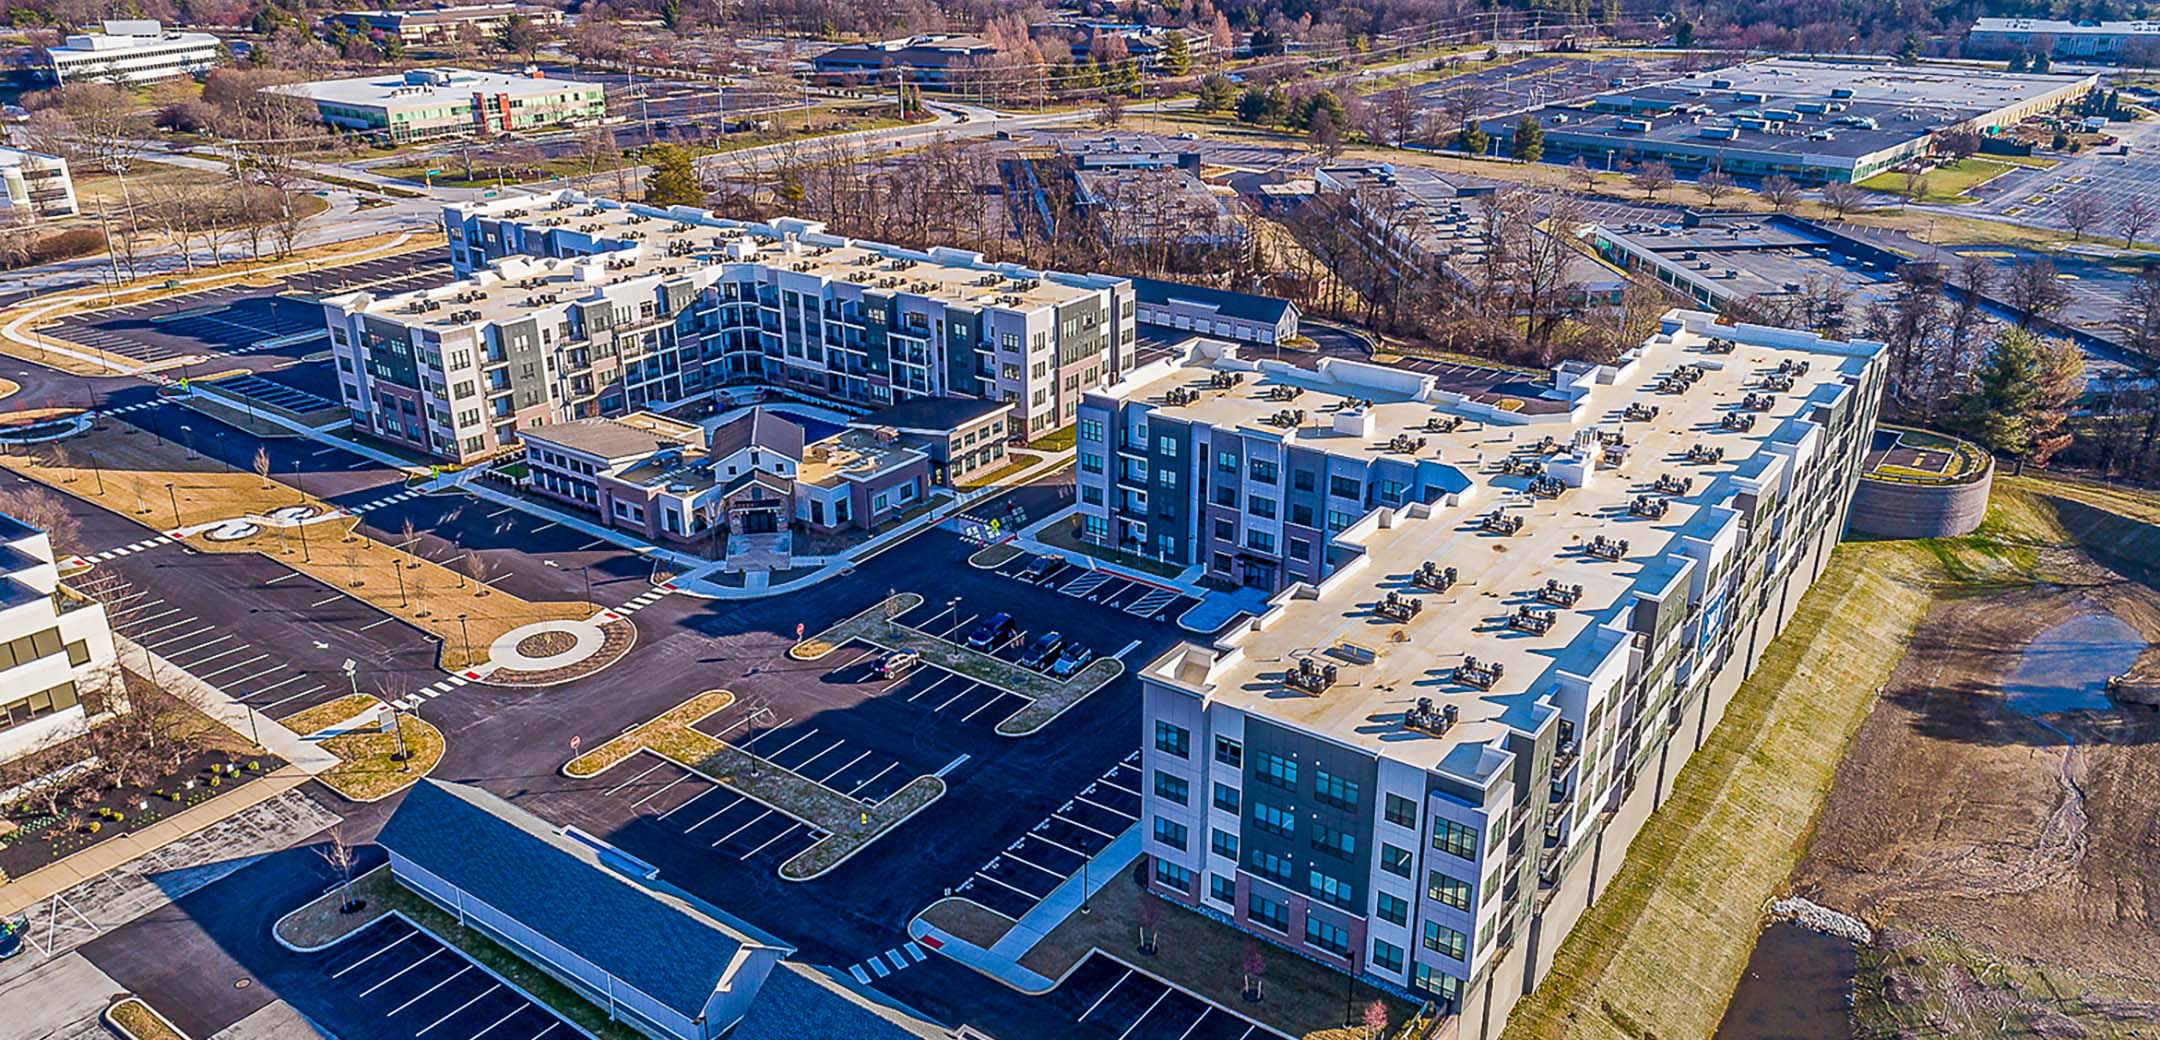 An aerial shot of the Sweadsford Square Apartments building, showcasing the large layout, parking amendments, and general area.